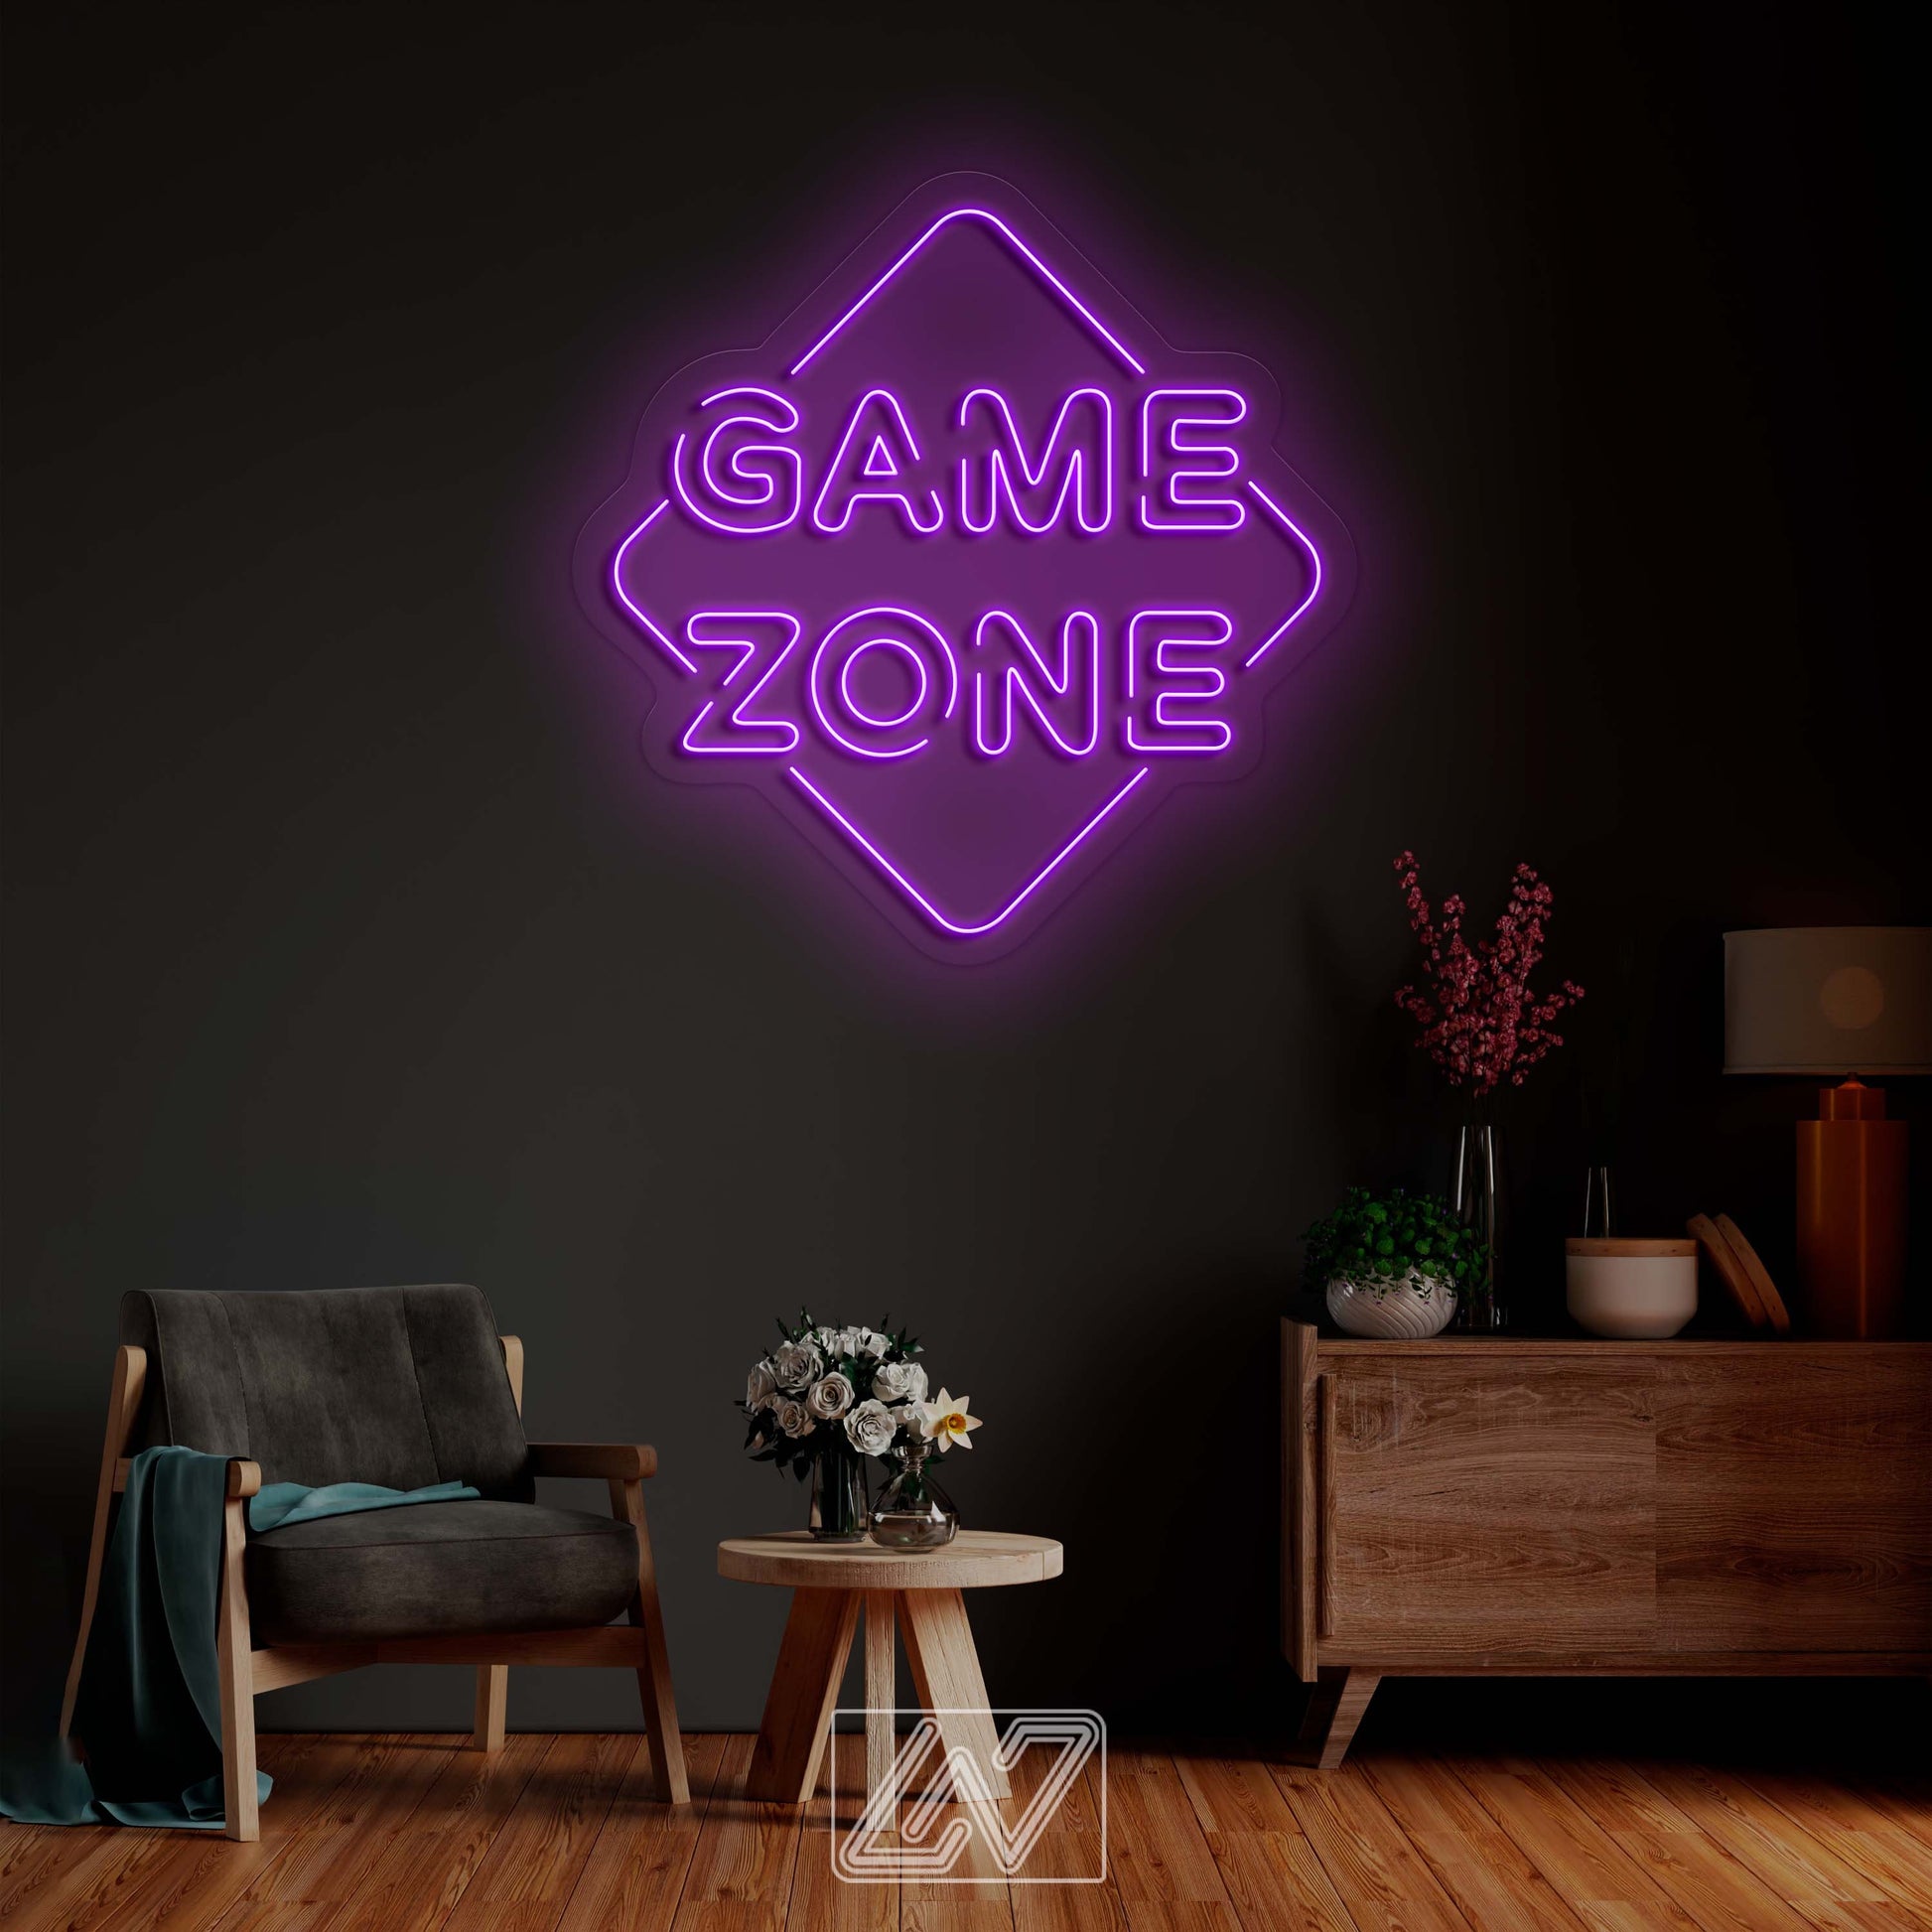 Game Zone - LED Neon Sign, games Neon Sign, games Character, Neon Game Zone,Player led sign,Stream light sign,Twitch, Game room